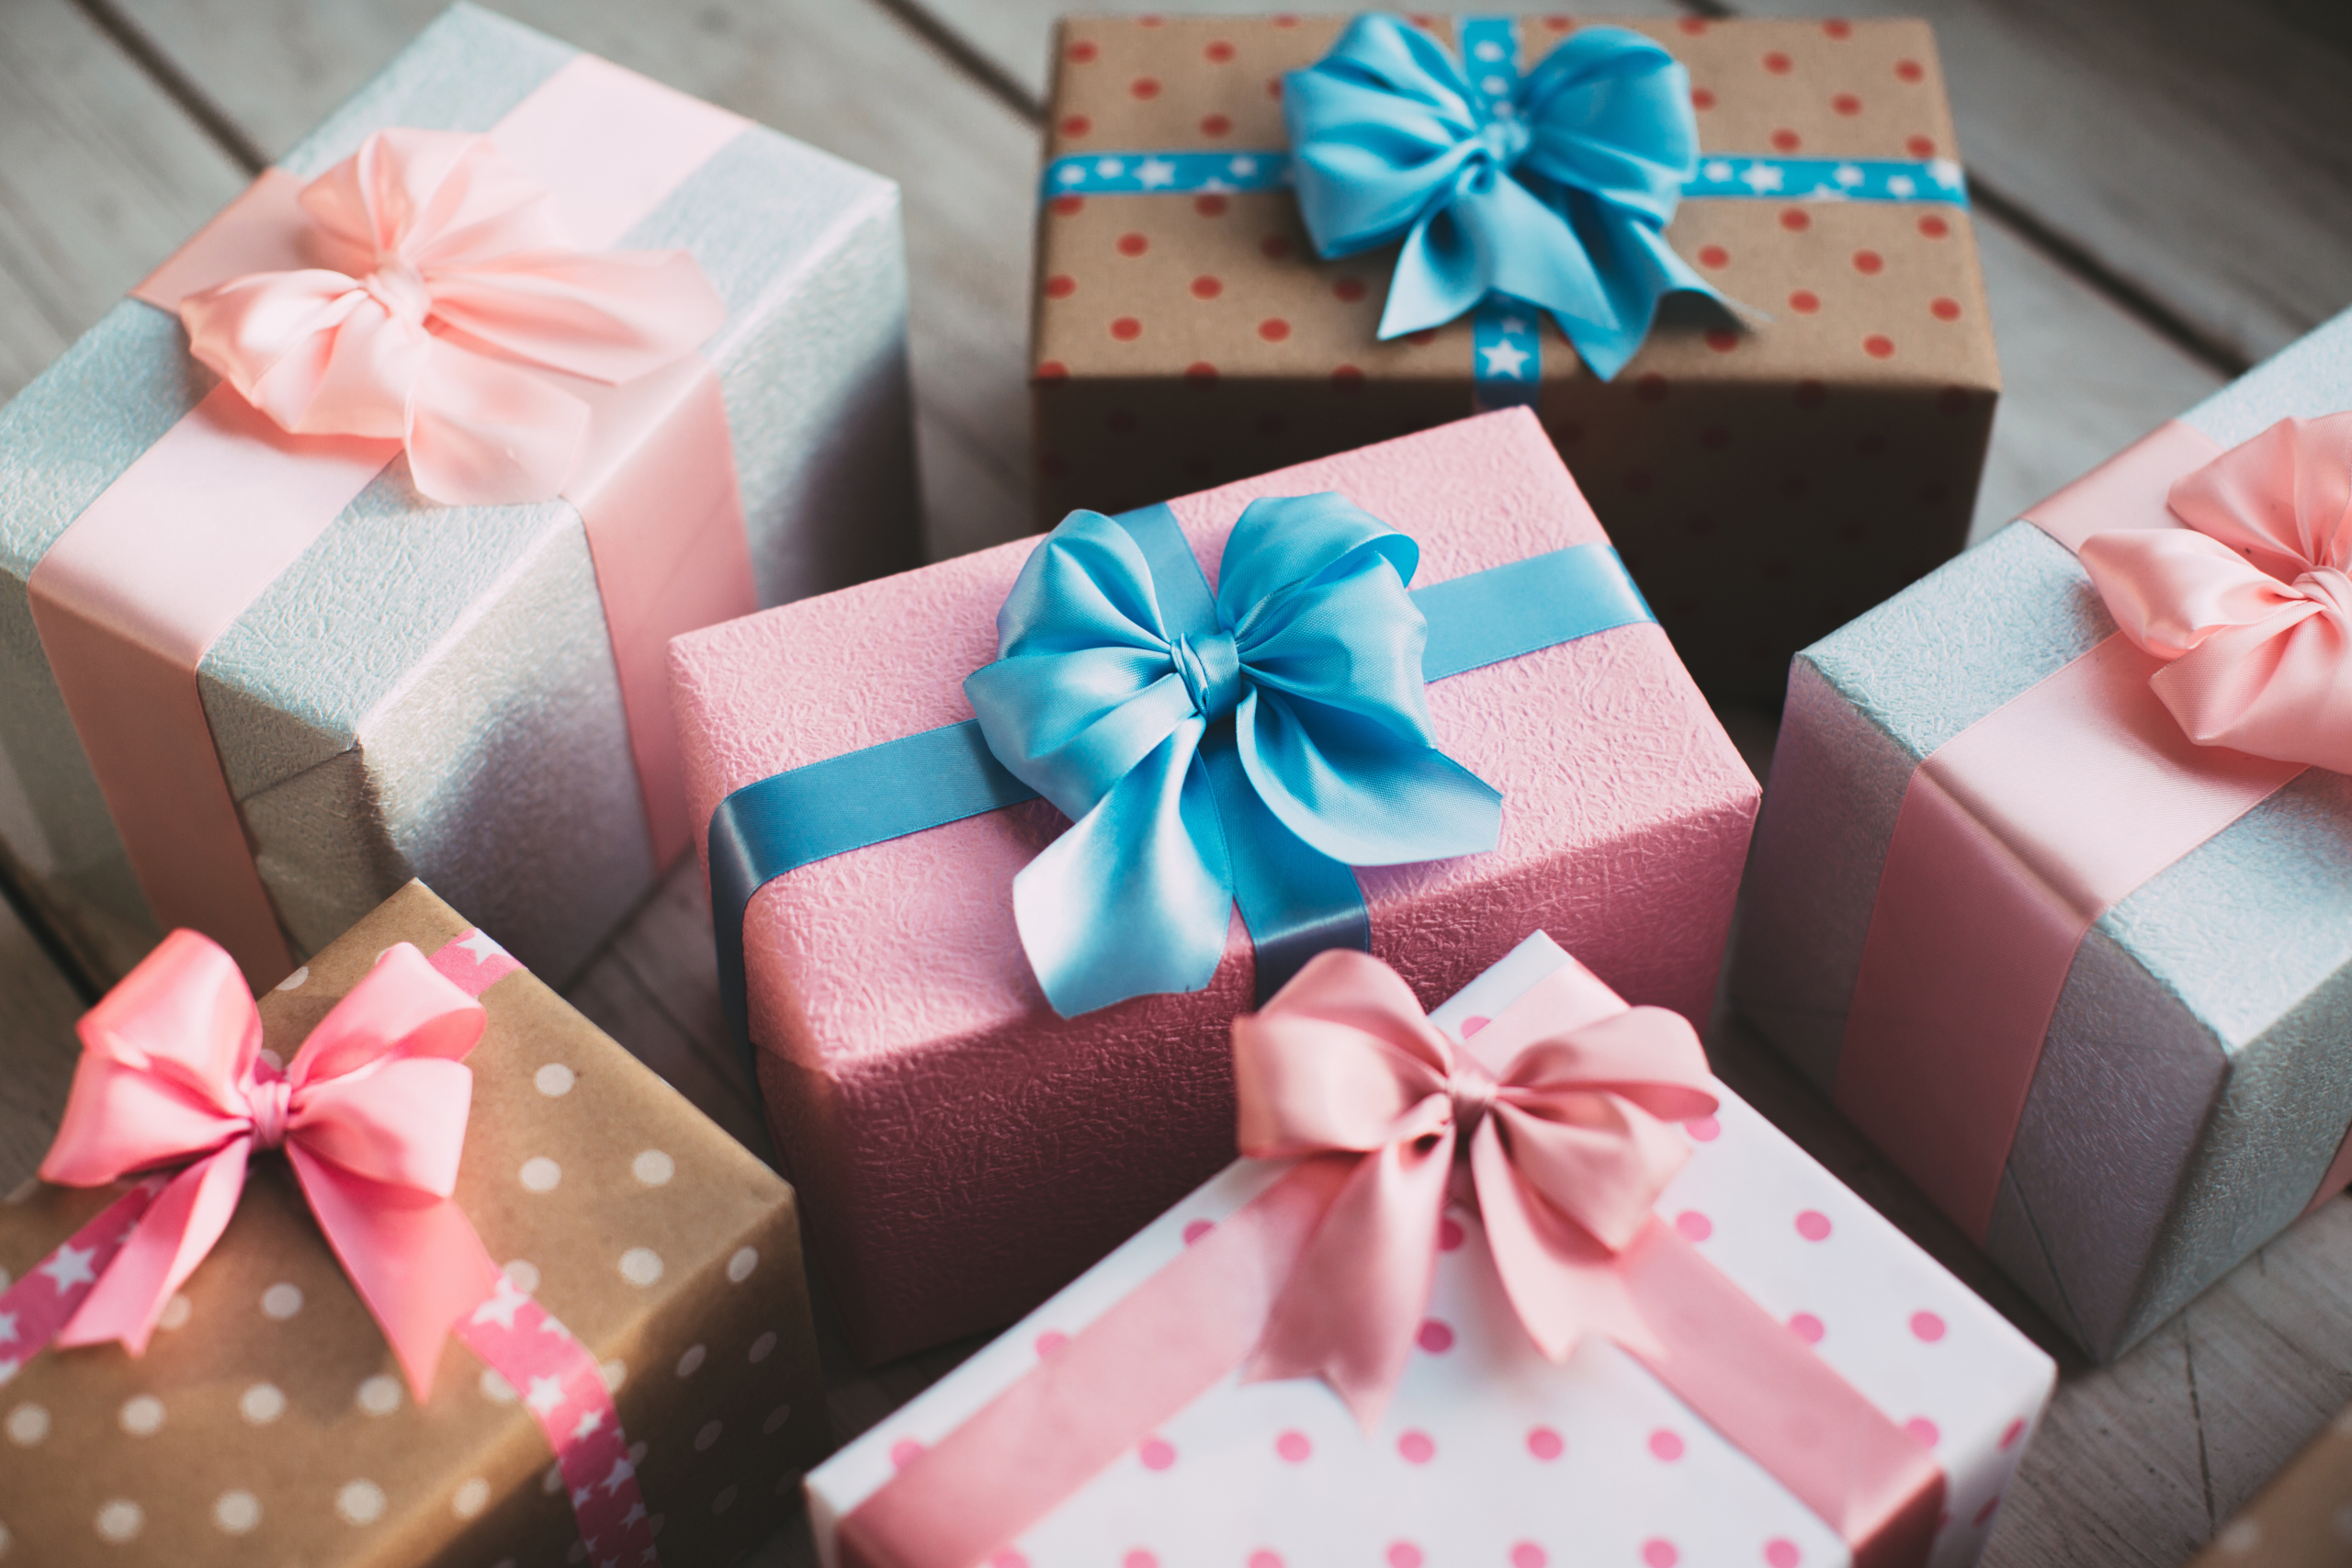 Giving gifts boosts happiness if we avoid the holiday stress. Here's how :  Shots - Health News : NPR